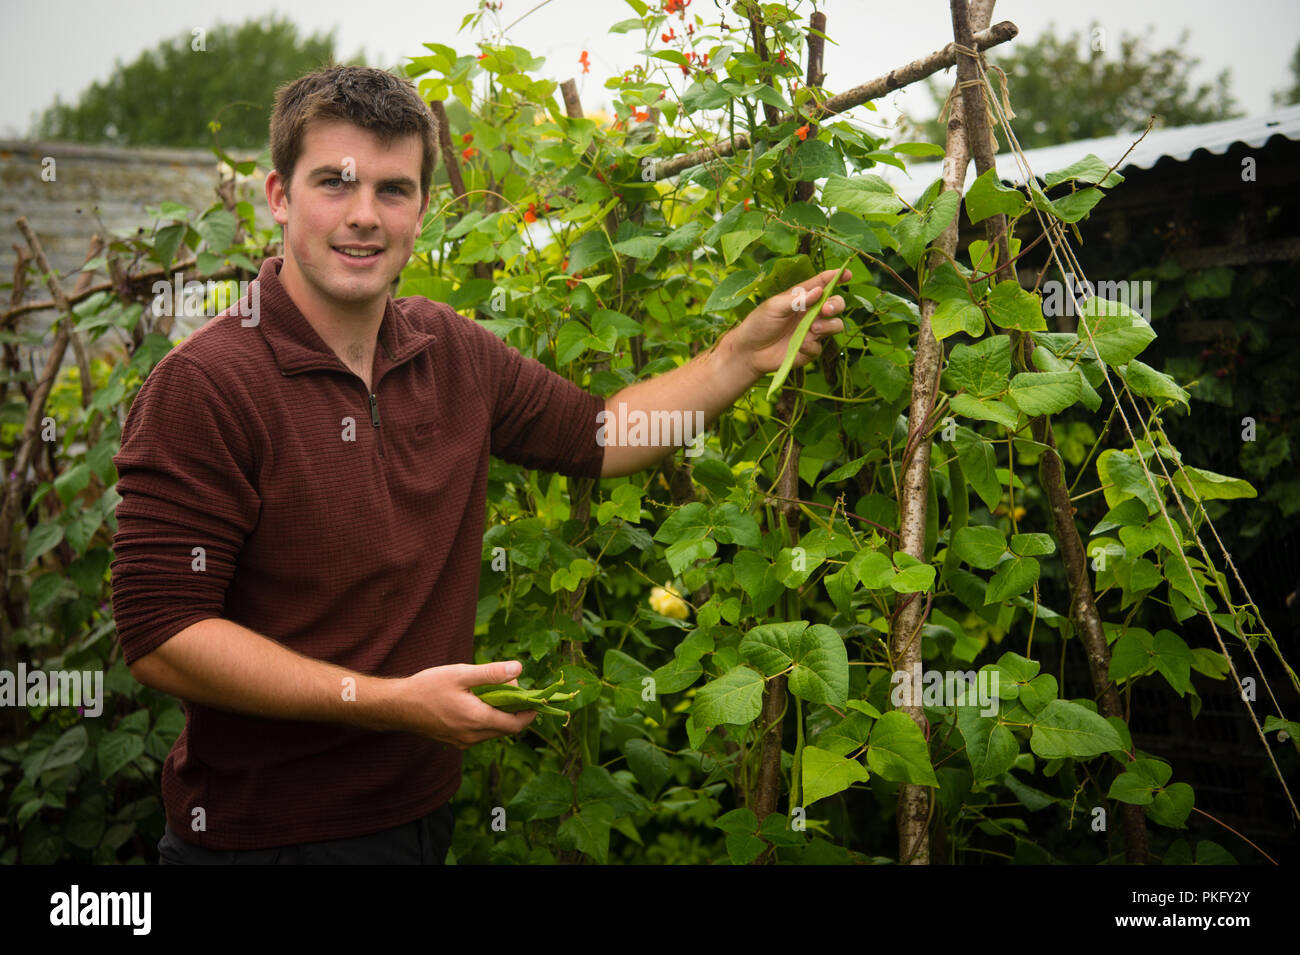 Huw Richards , young welsh celebrity video blogger and campaigning organic vegetable grower, in his kitchen garden at Tregaron, Wales UK Stock Photo